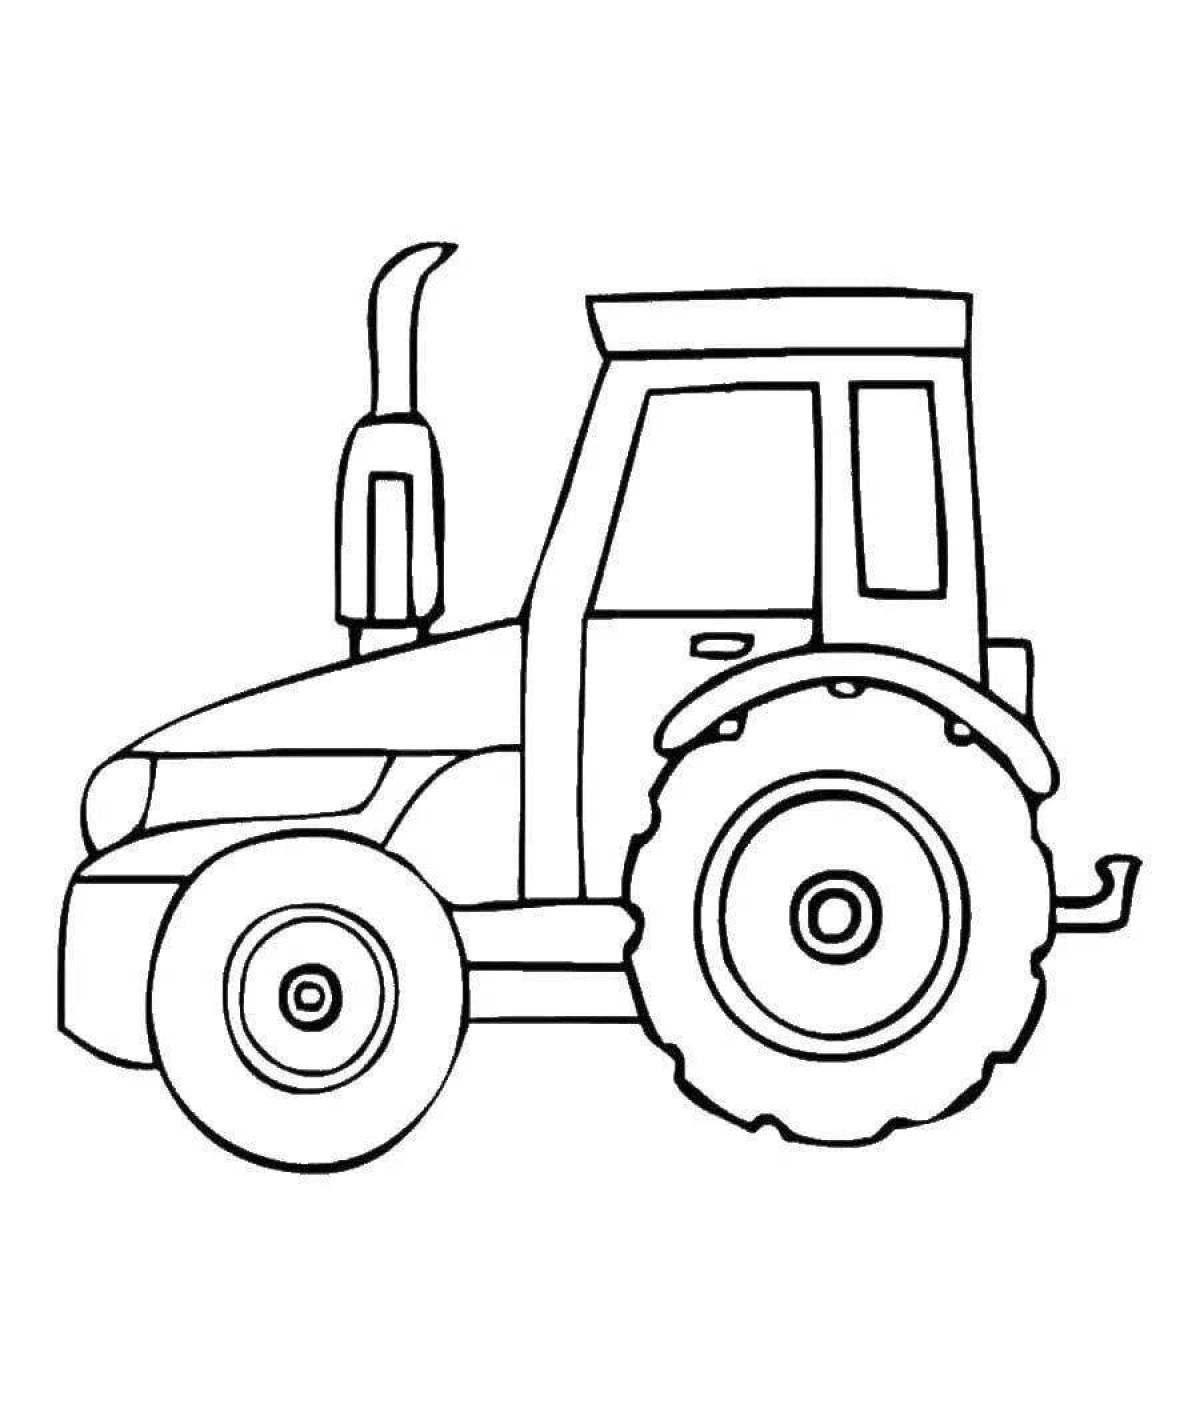 Playful tractor coloring page for kids